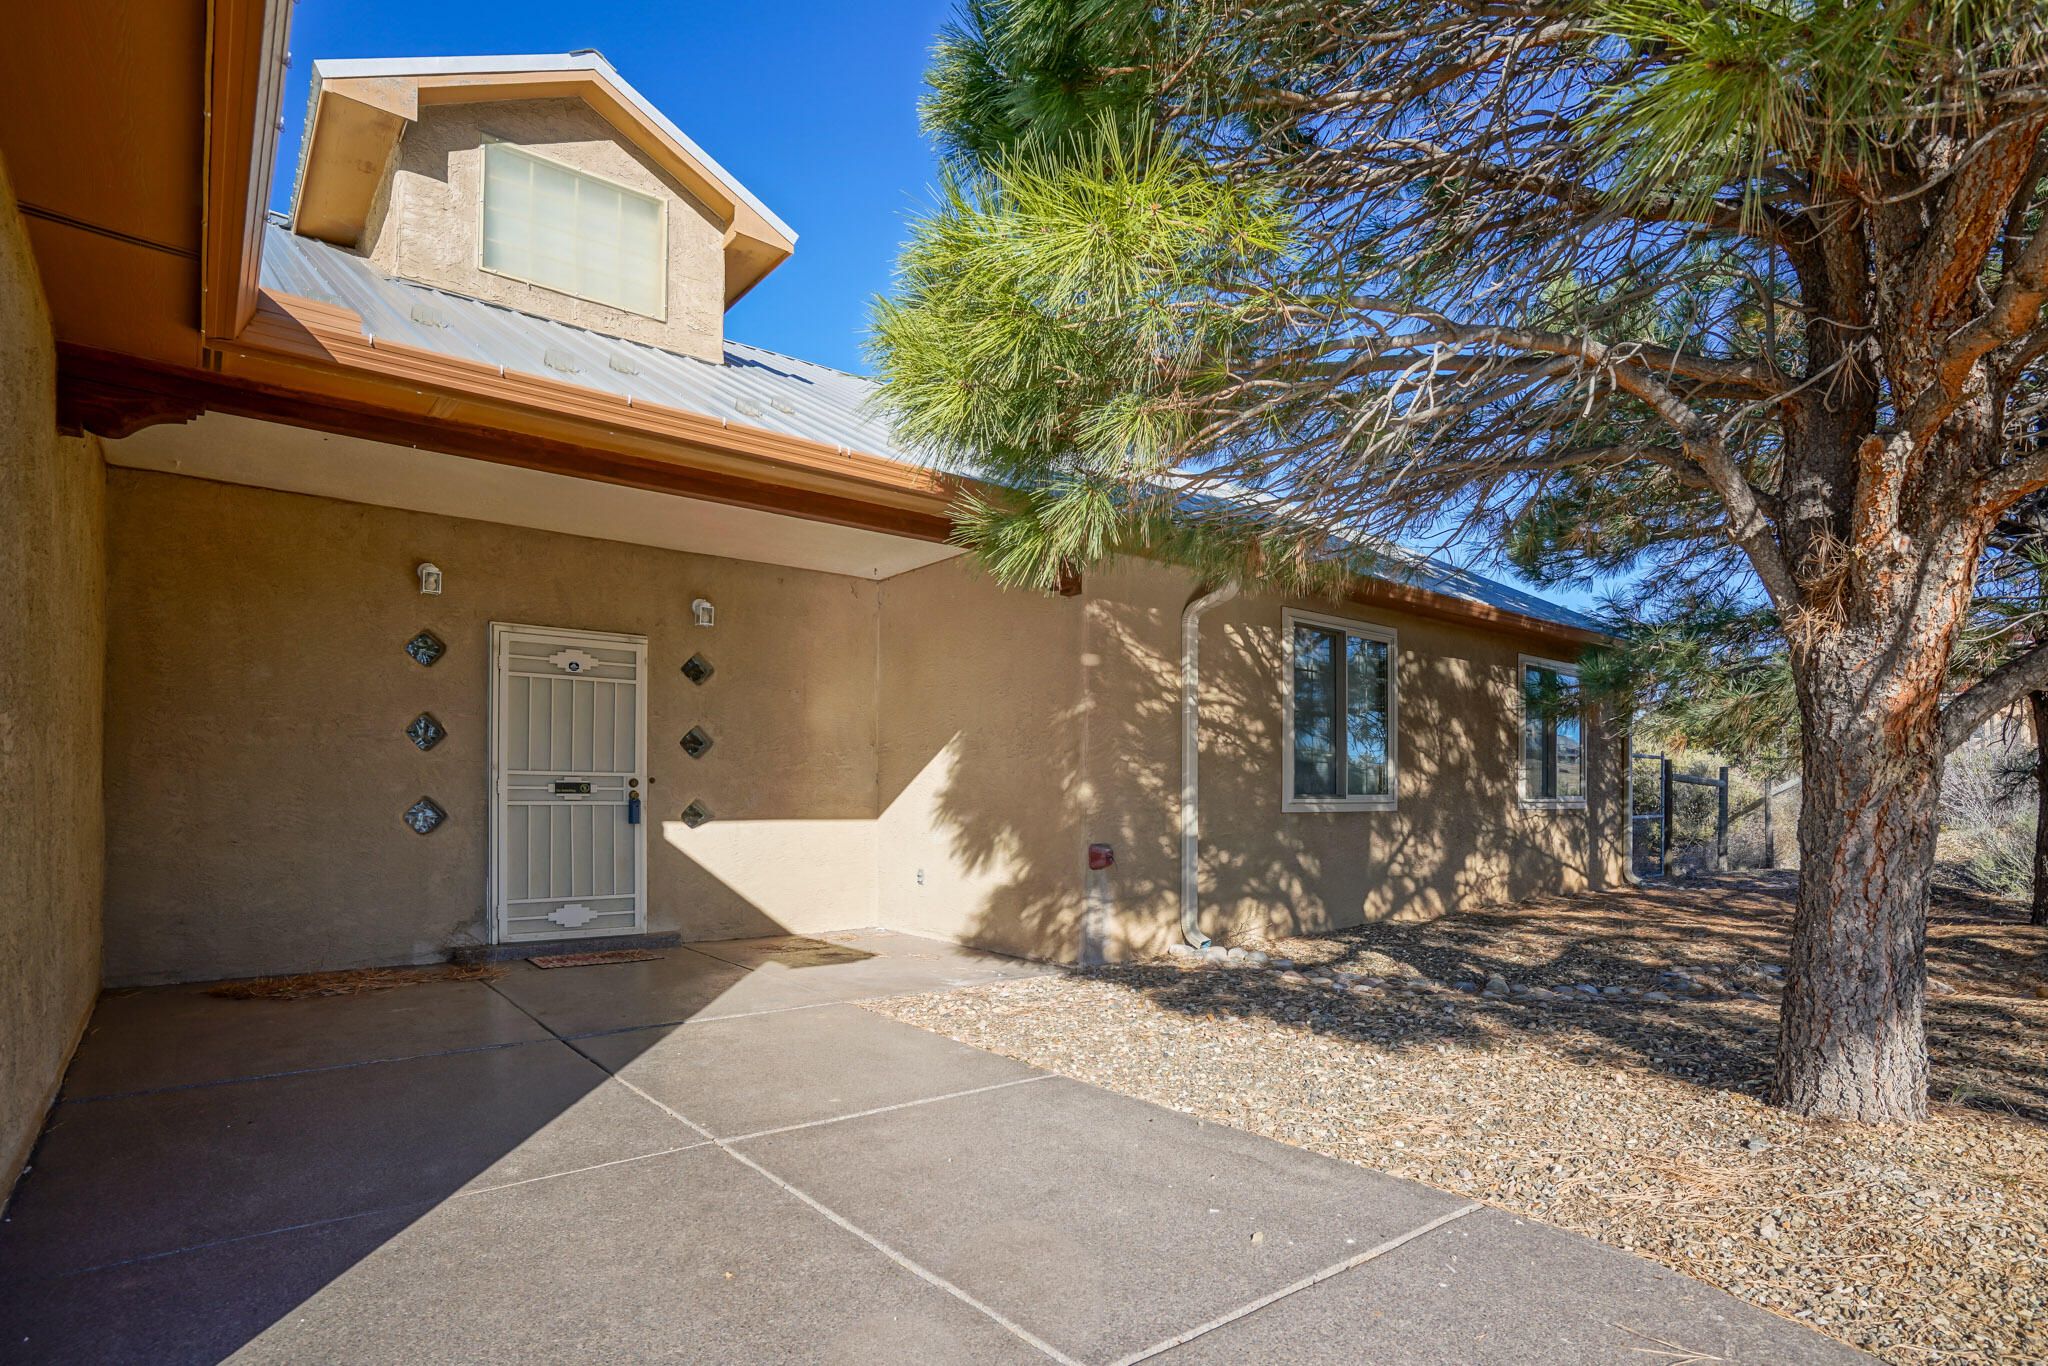 Open House Sunday 12/4 from 1-3 pm! Wonderful panoramic views from this single level Northern New Mexican home! Open great room with high ceilings, fireplace, kitchen bar & lots of natural light overlooking your 1.38 acres!! Radiant floor heating for those winter nights, inviting foyer with a wood beam that accents the cathedral ceiling. The Owners Suite has spacious walk in closet, jetted tub & double sinks. Lovely patios offer plenty of options for star gazing, morning coffee or just relaxing to the sound of the wind in the trees! Make your appointment to see this lovely home!!! Virtual walkthrough tour also available!